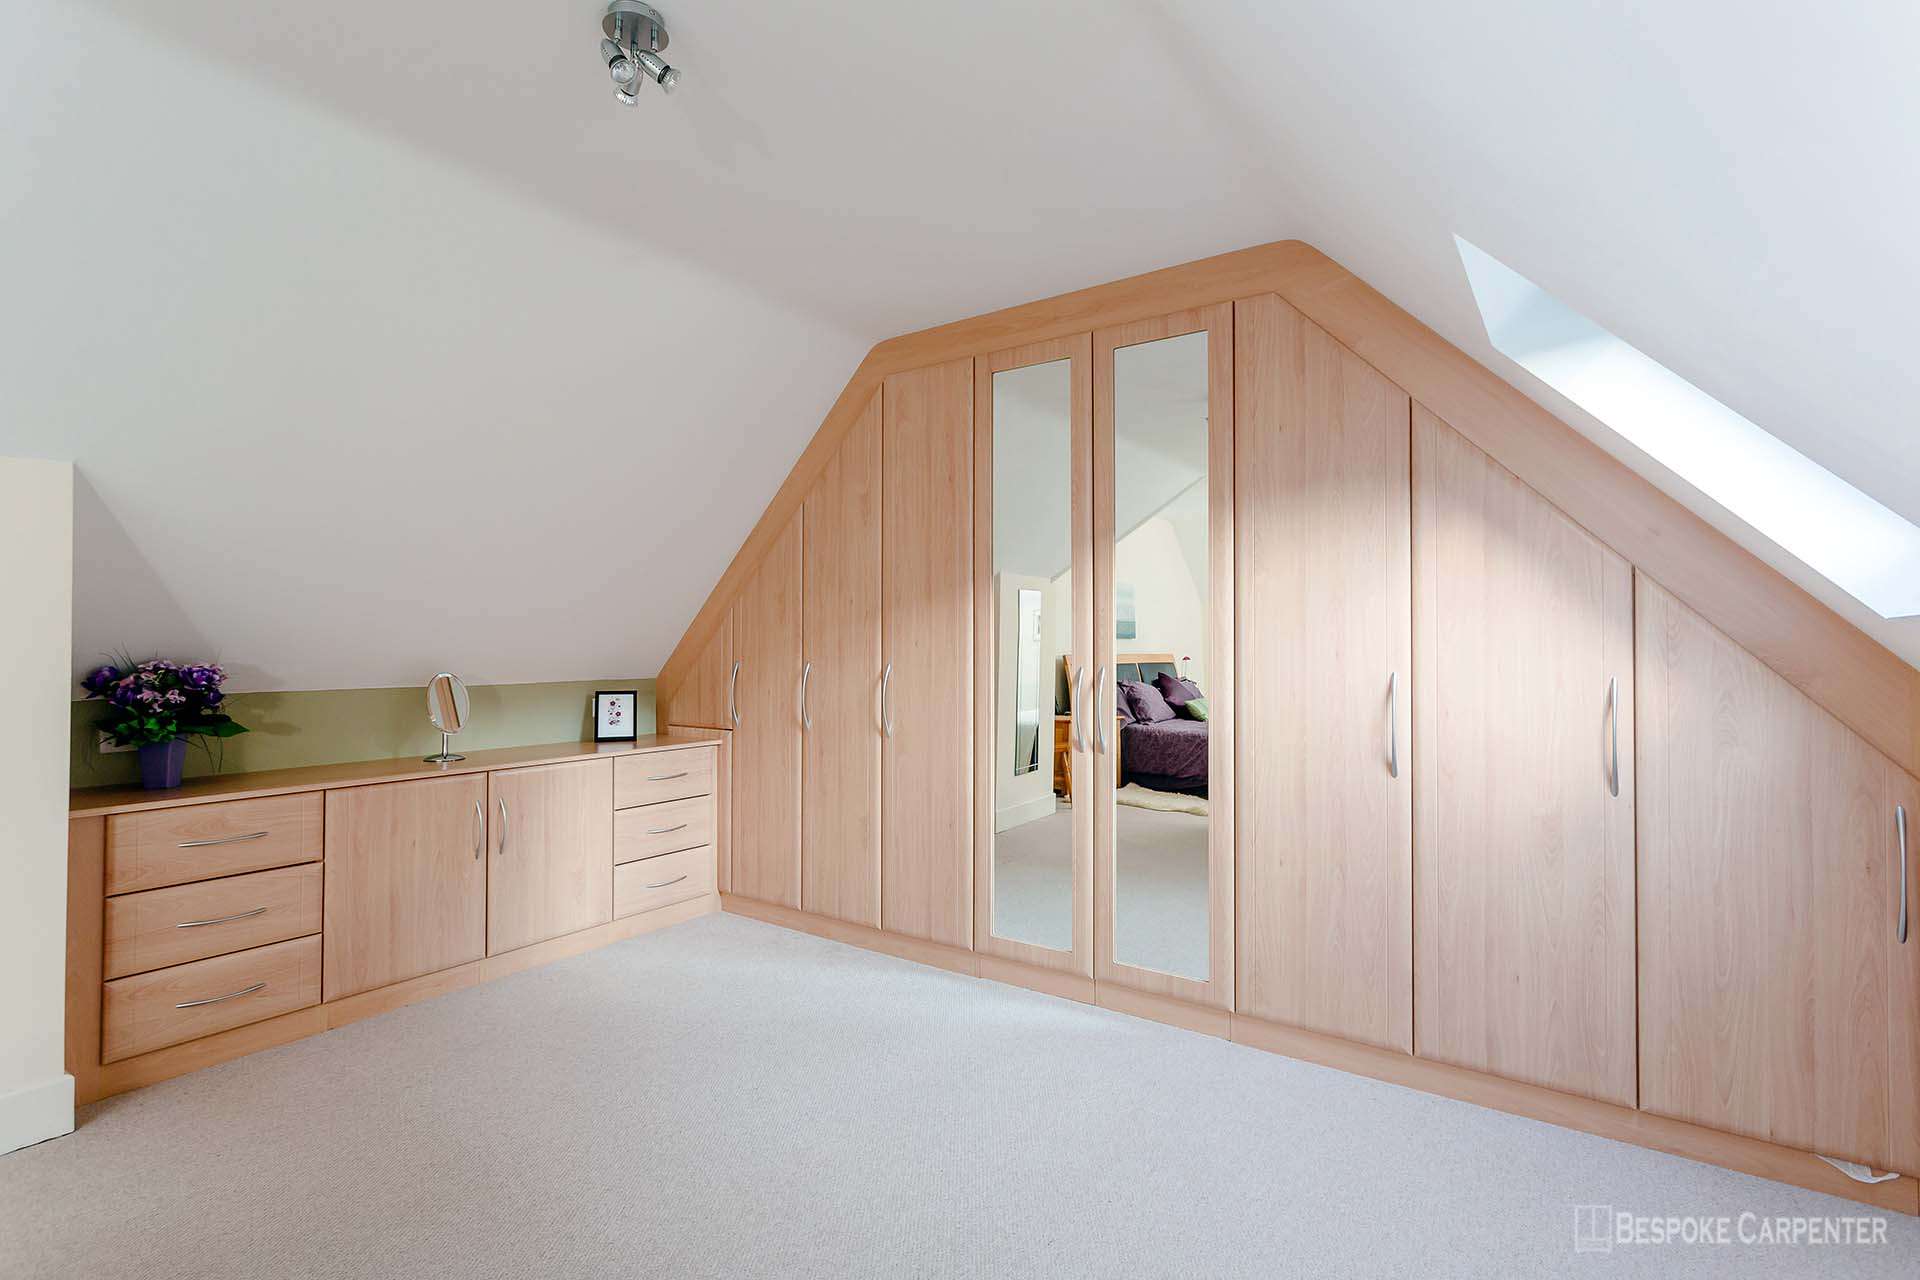 Bespoke carpentry and joinery in Honor Oak